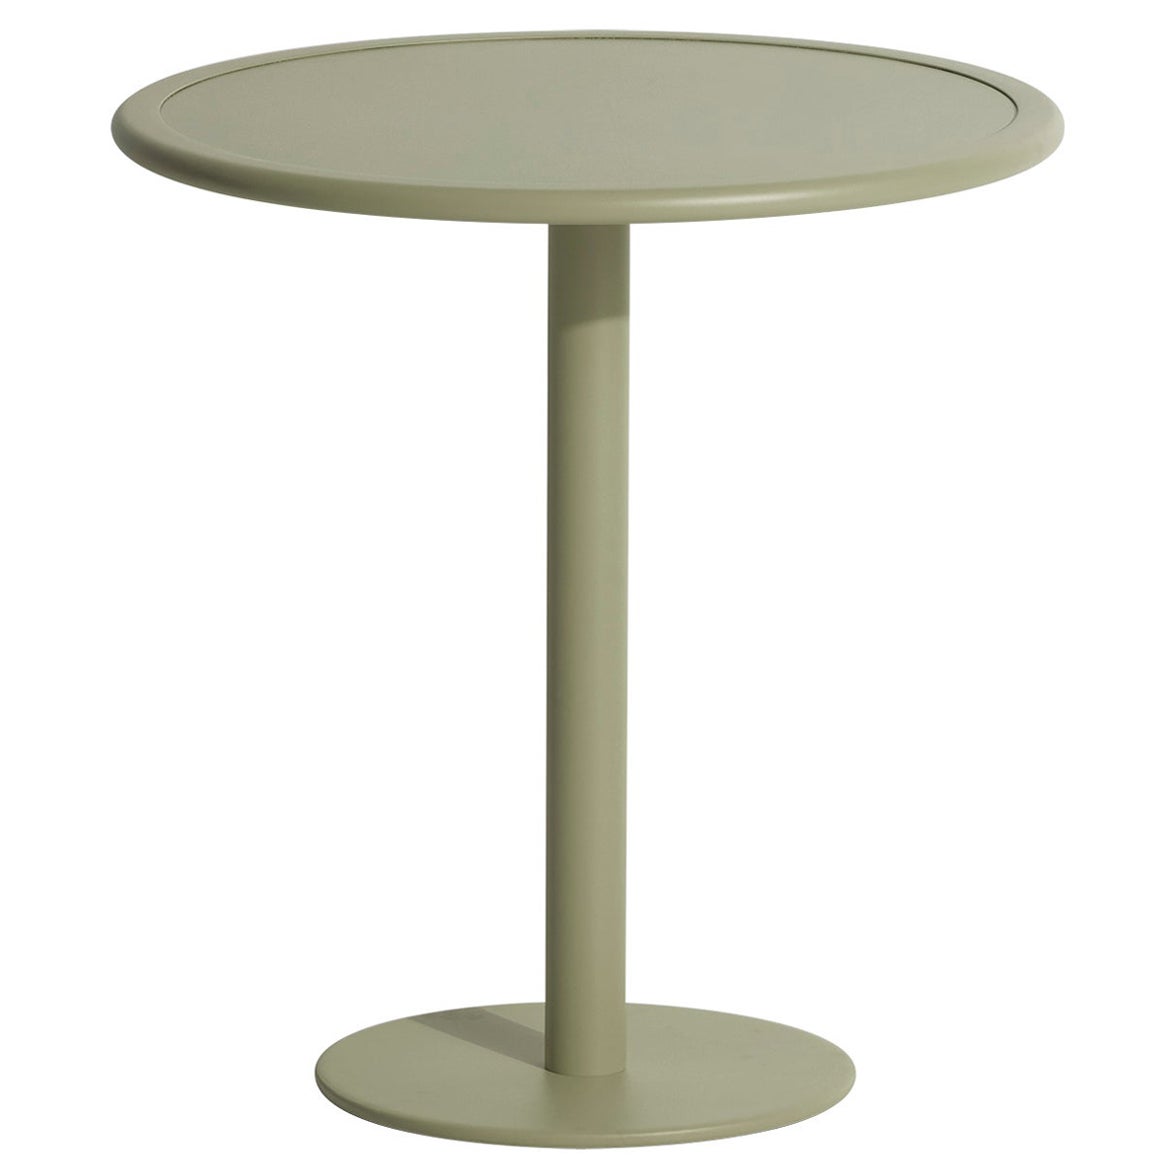 Petite Friture Week-End Bistro Round Dining Table in Jade Green Aluminium, 2017 For Sale